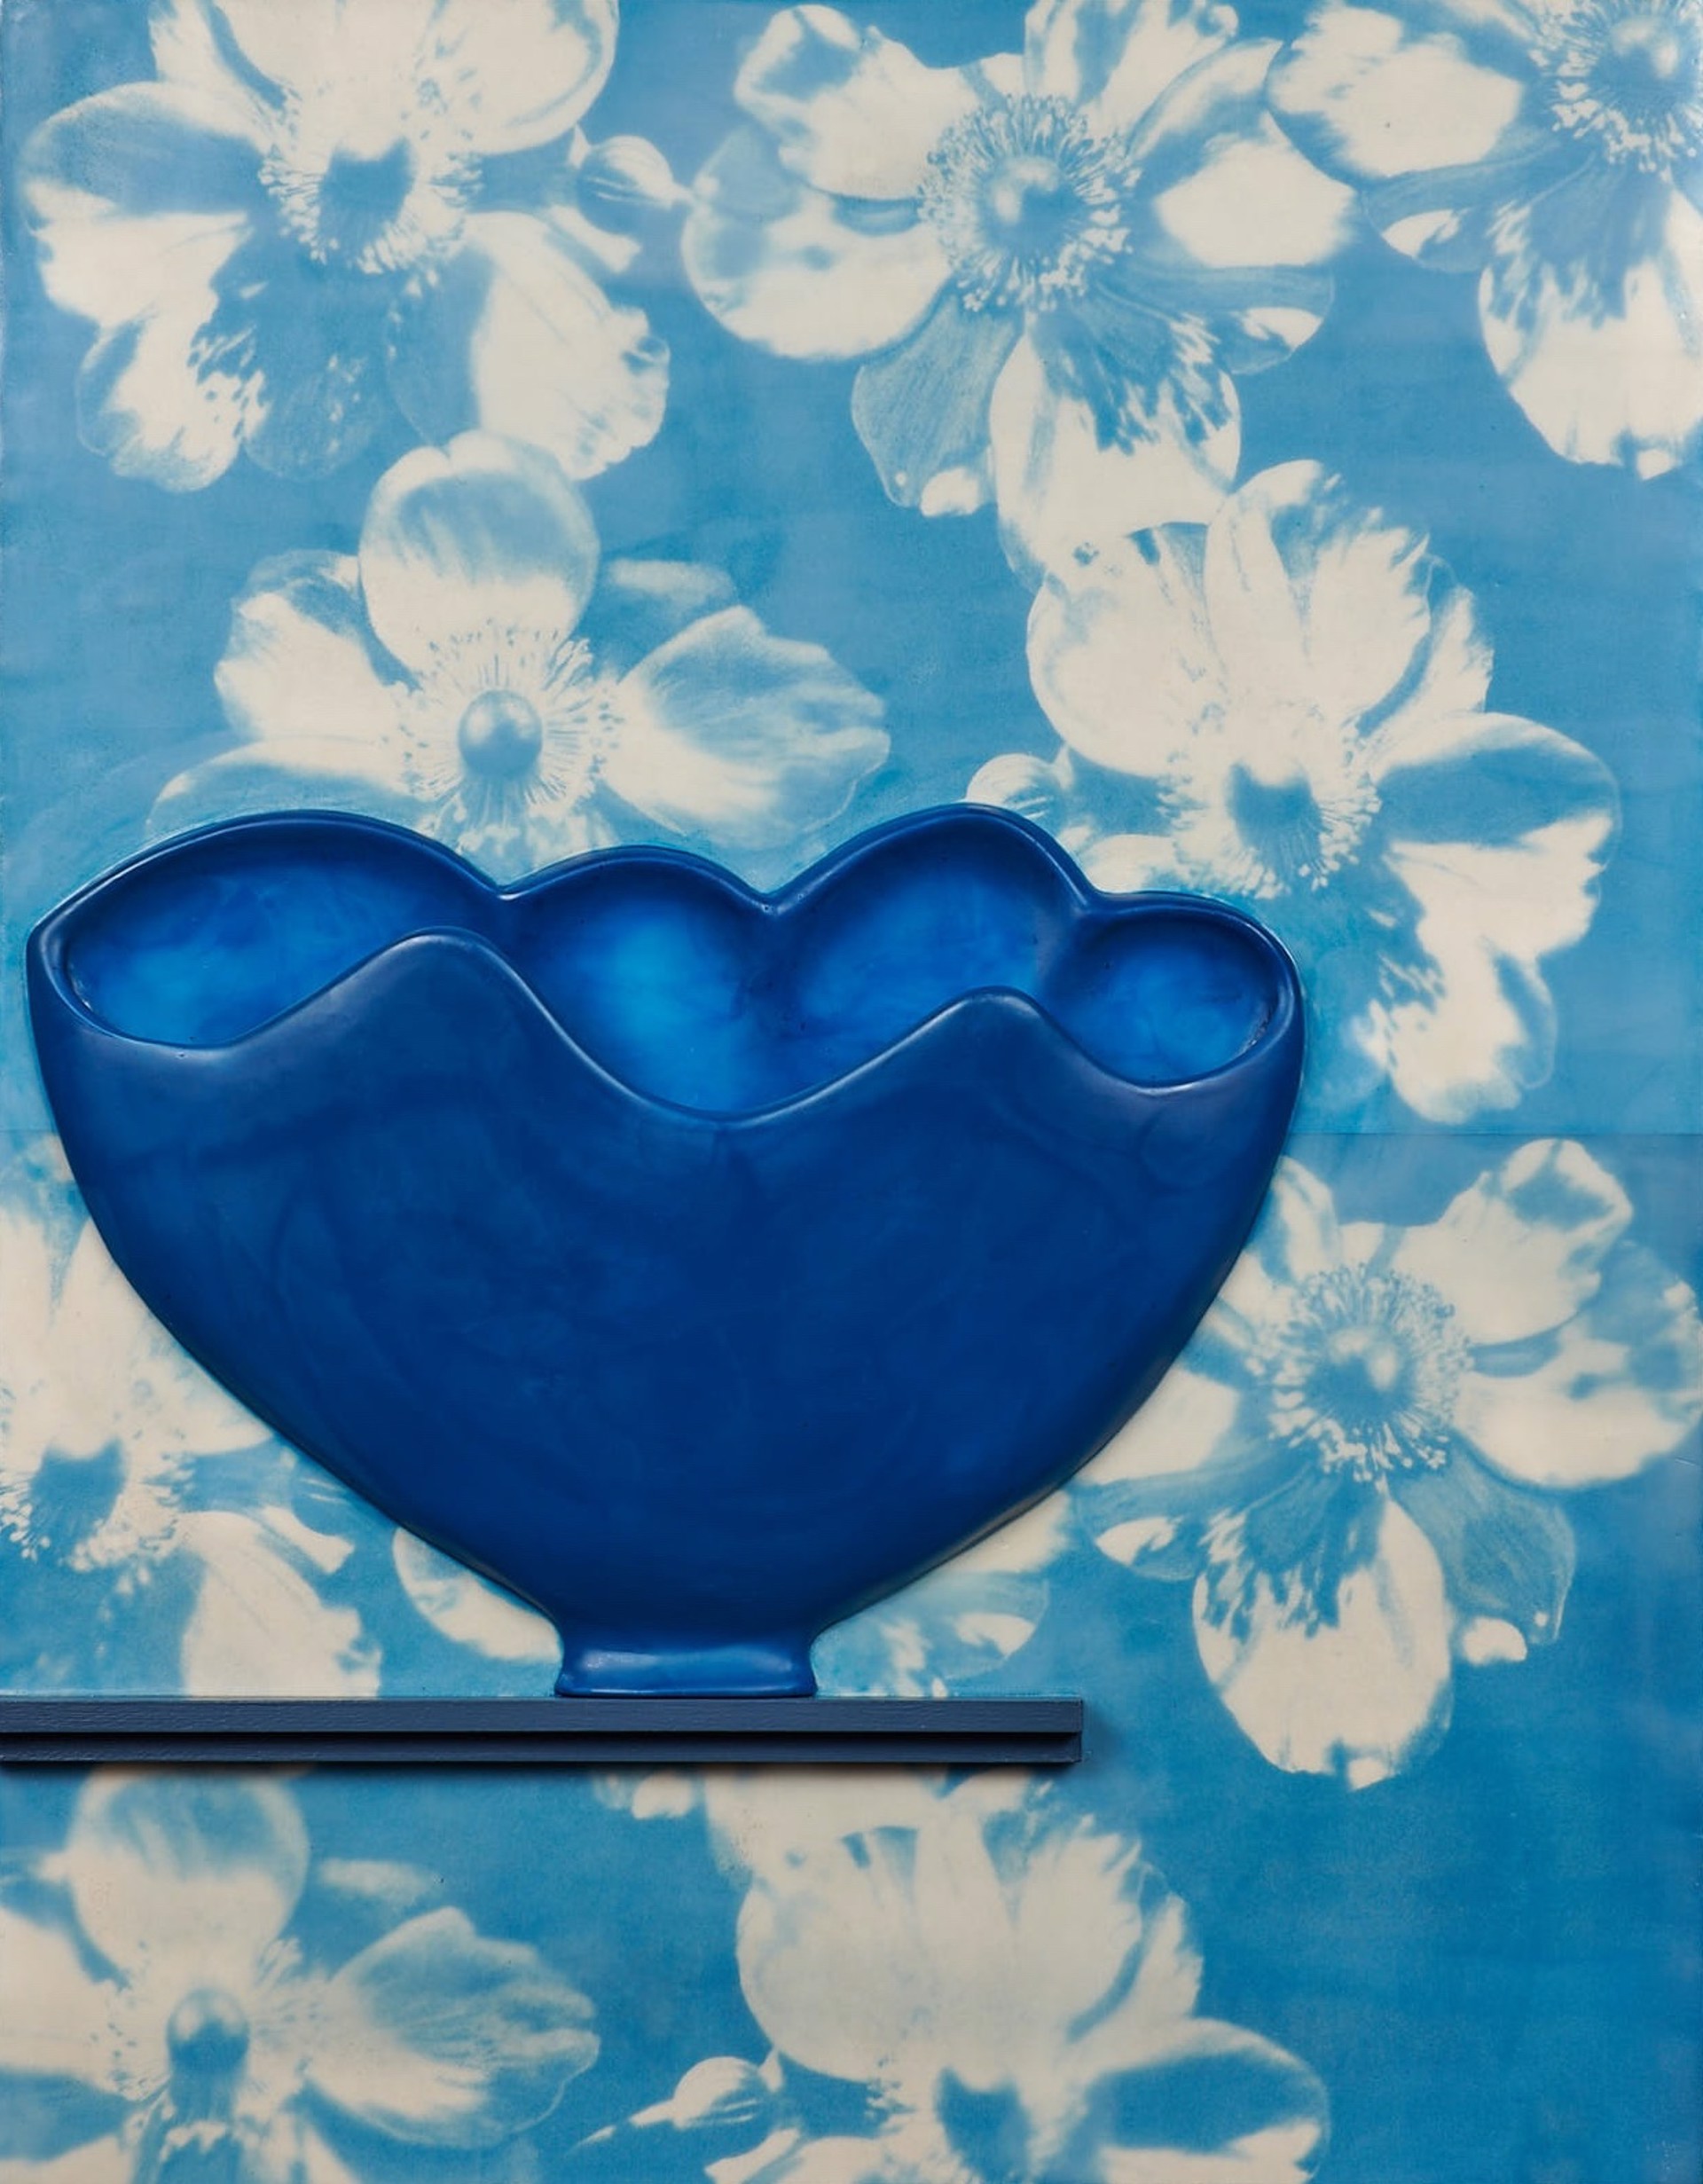 Luscious Blue Bowl by Claudia Hollister